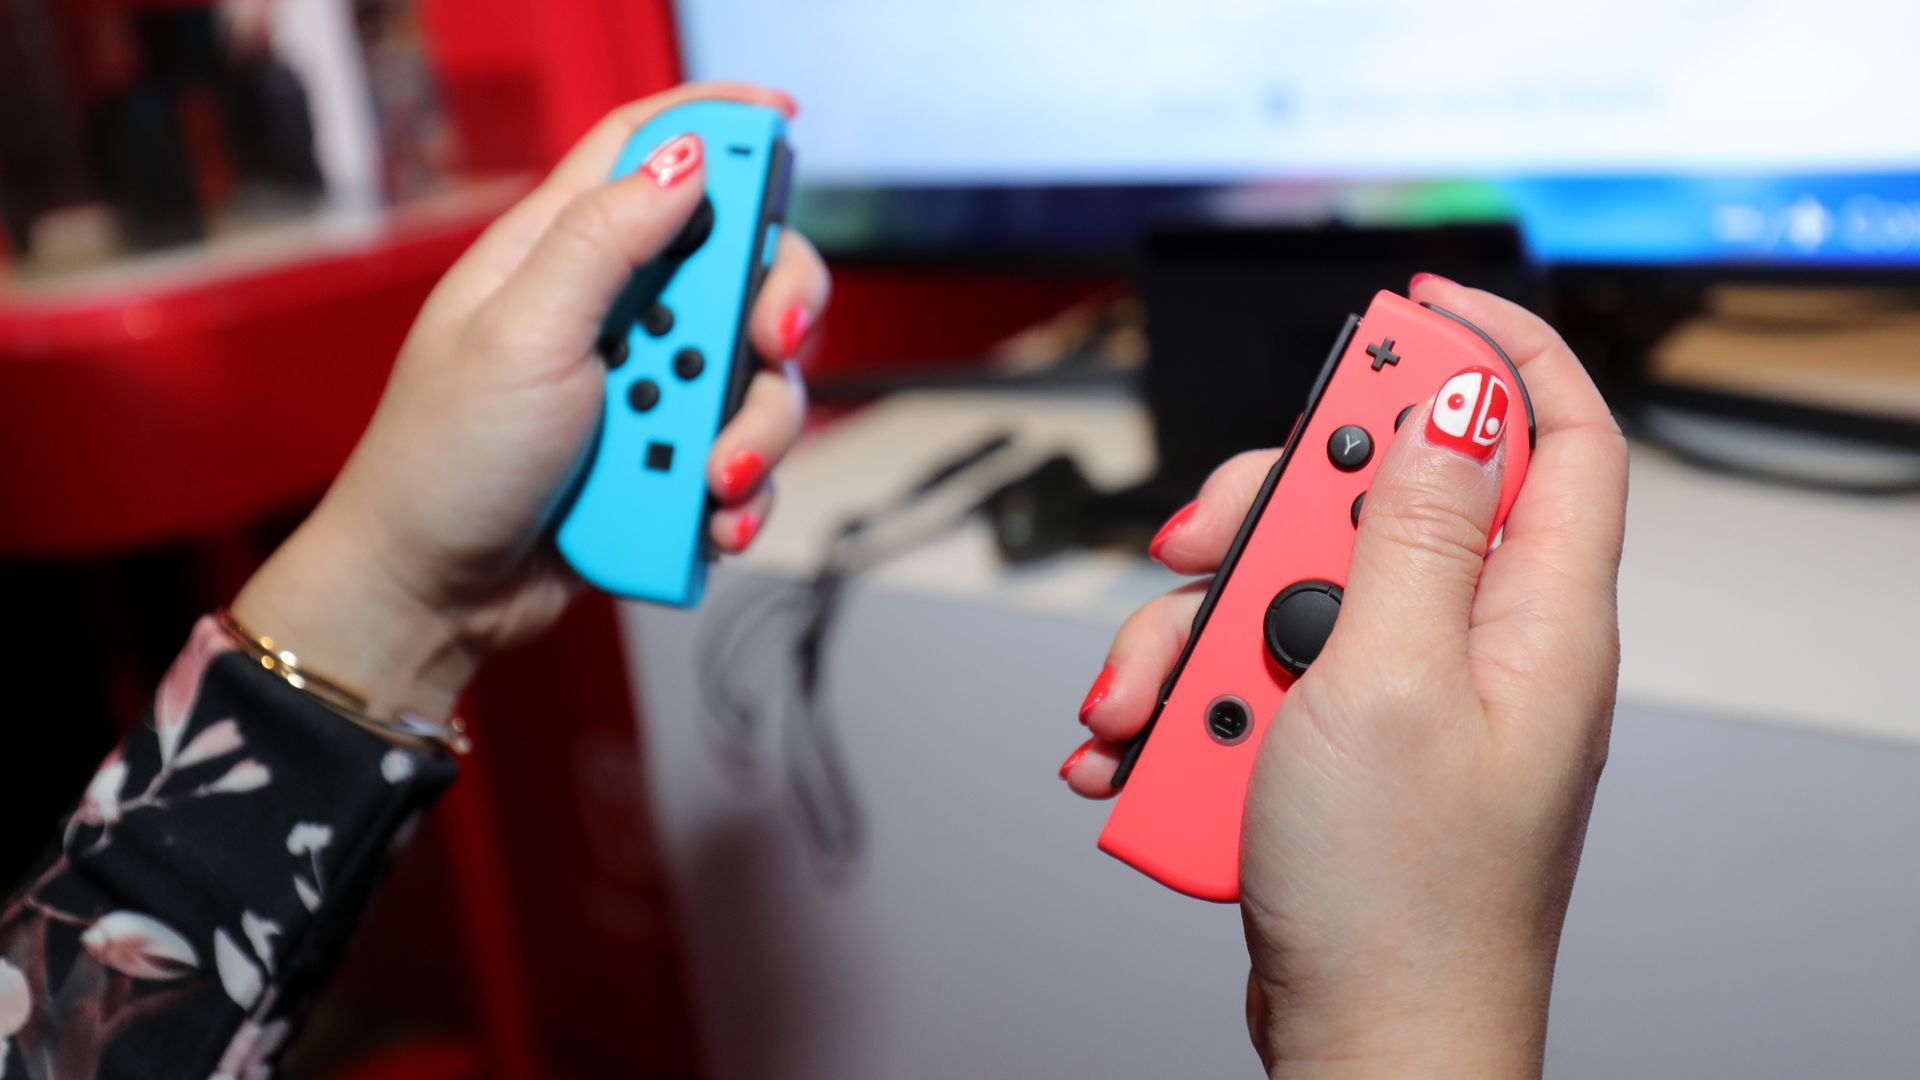 A pair of hands hold two Switch gaming consoles